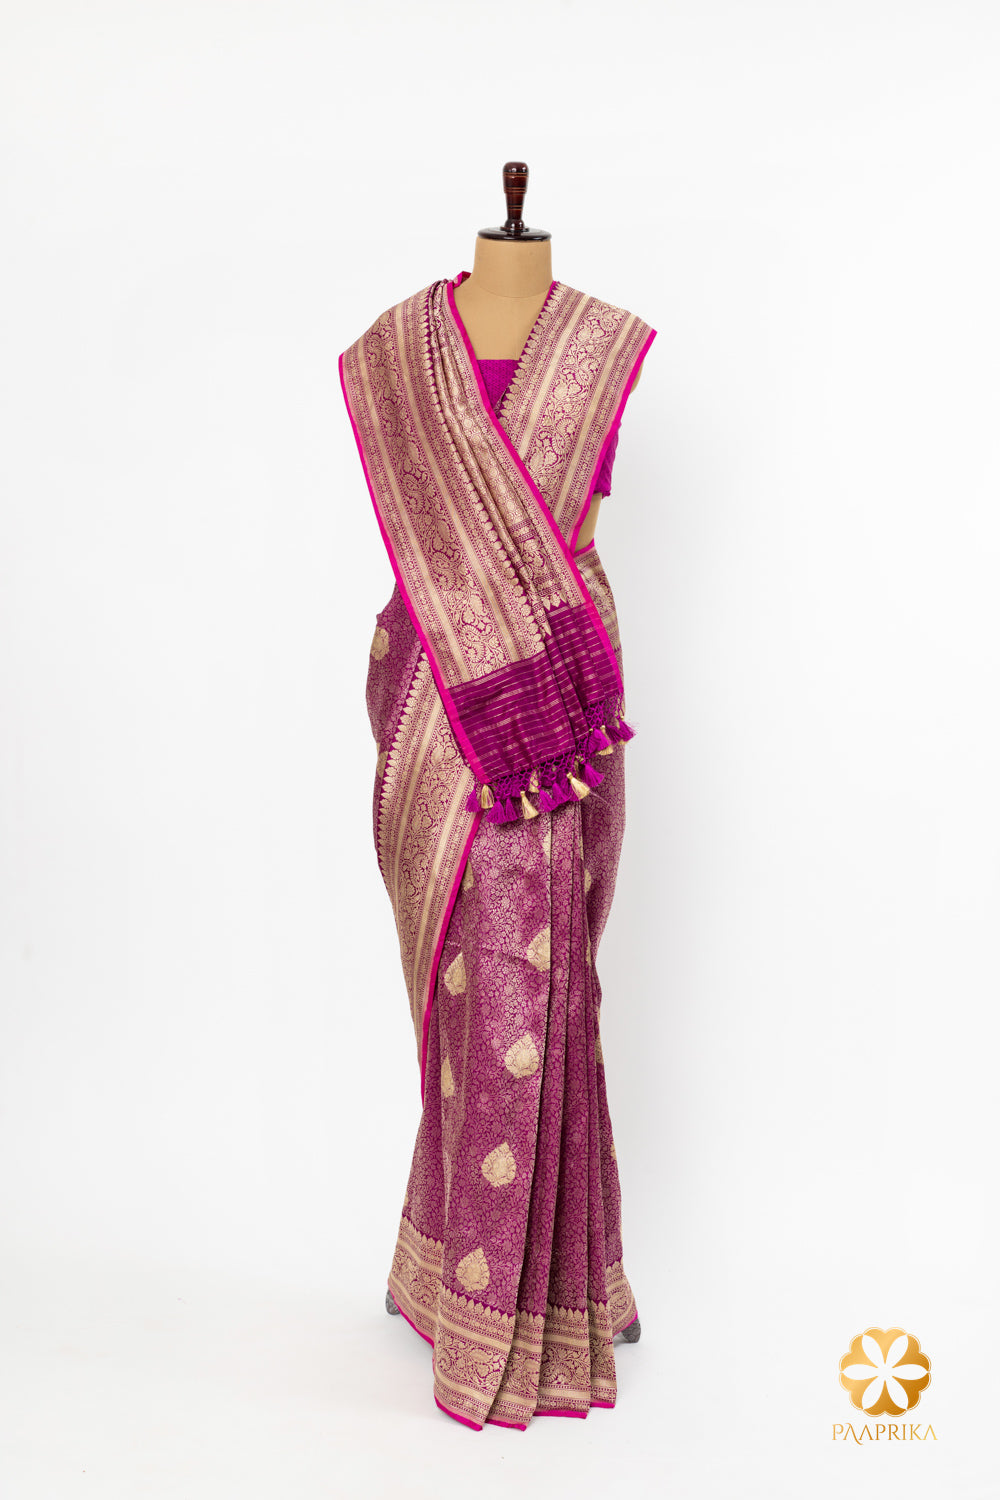 A detailed view of the hot pink selvedge of the saree, adding a striking contrast and enhancing its overall appeal.